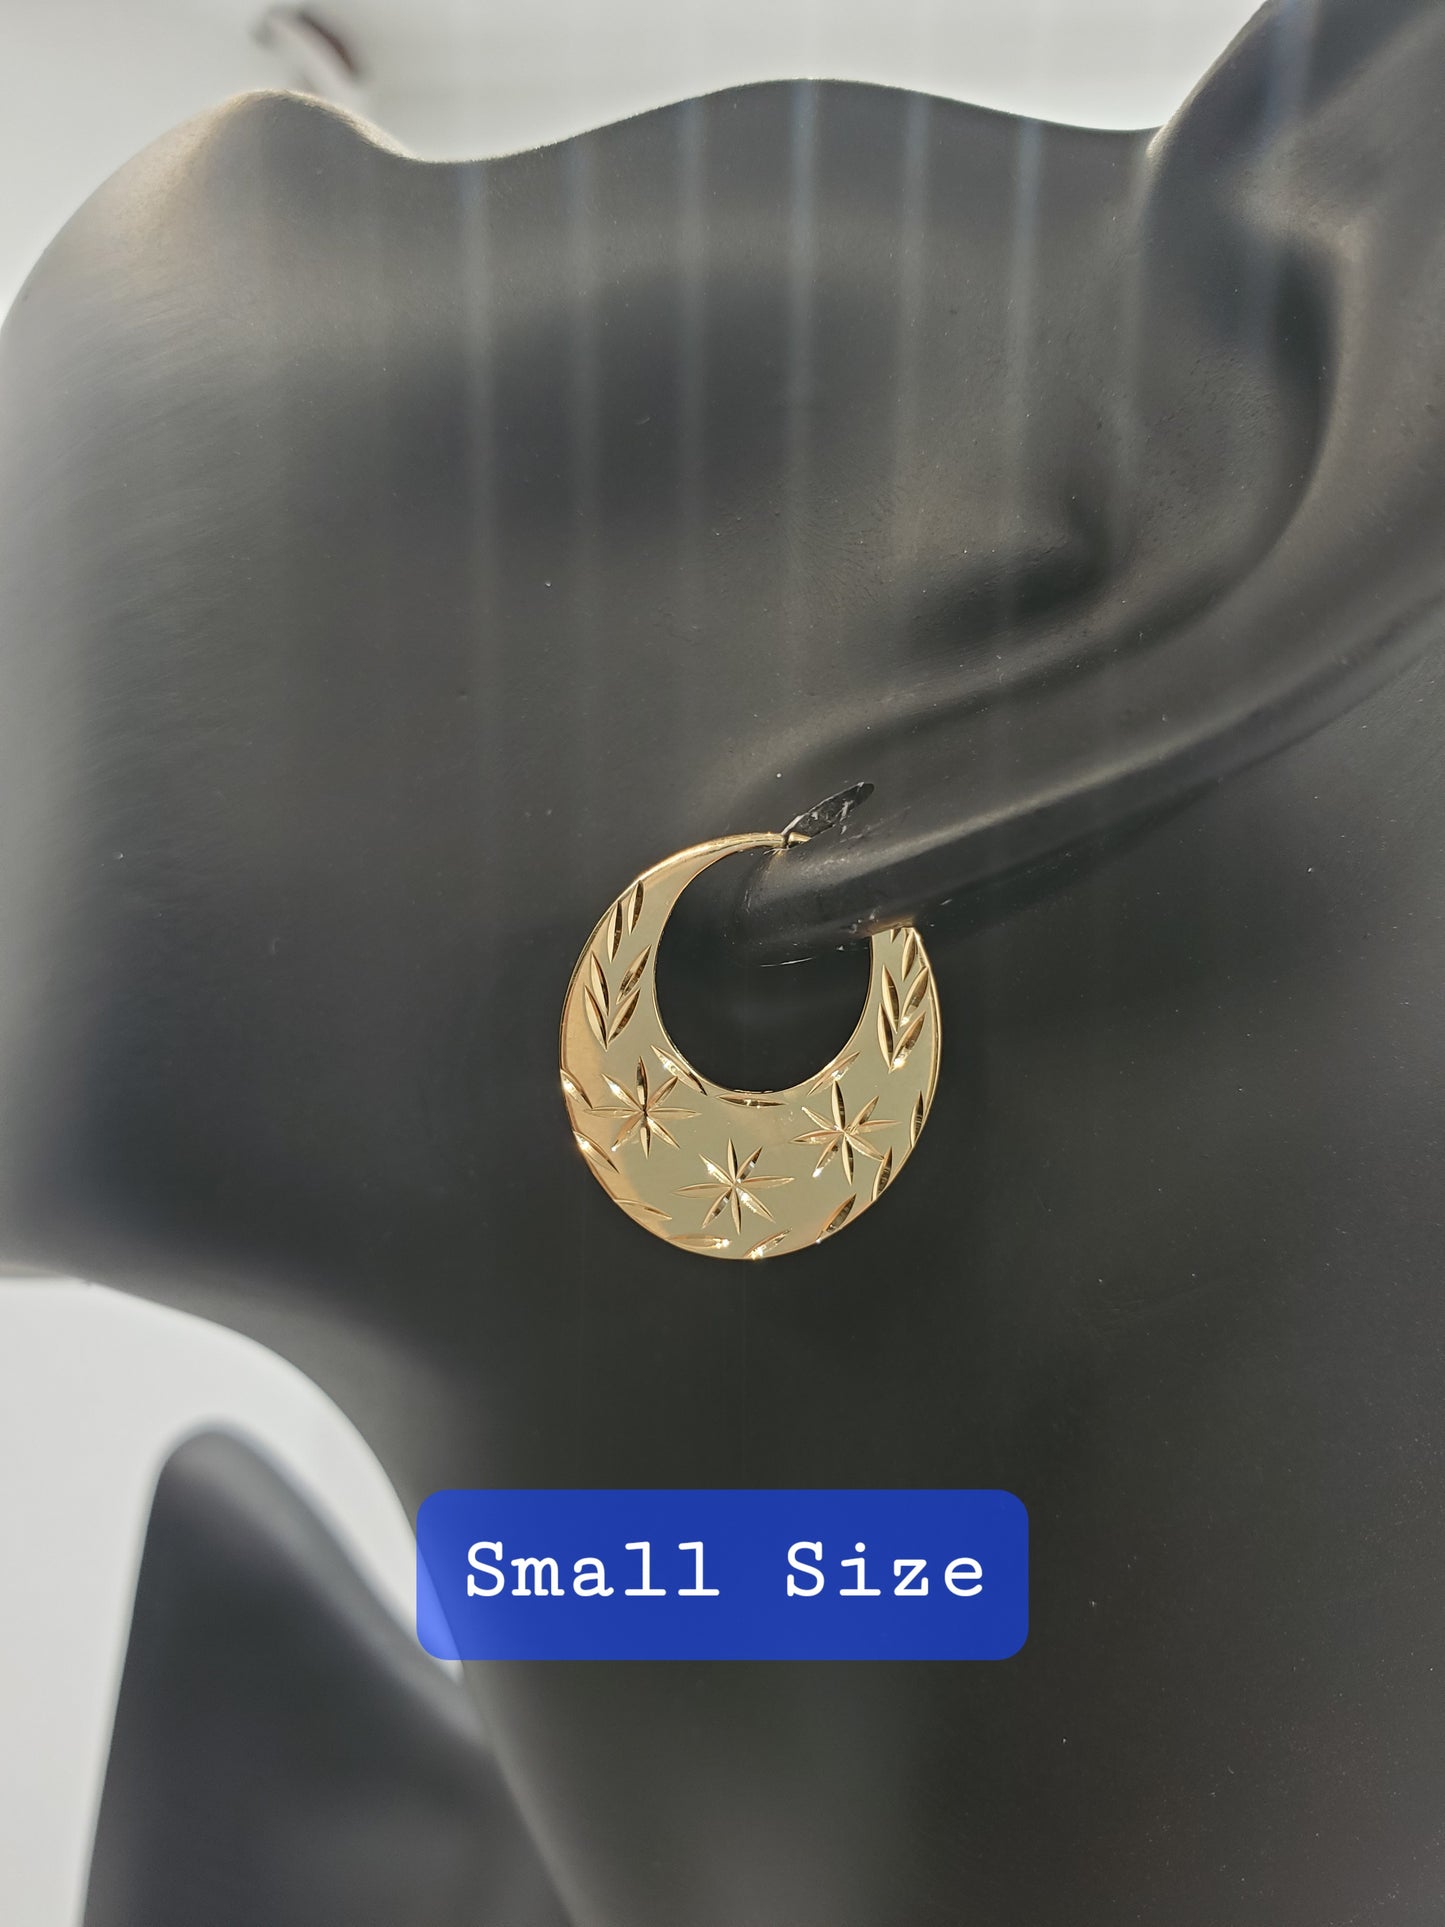 18k Real Gold Nattiyan Classic Earrings (Sizes Available)